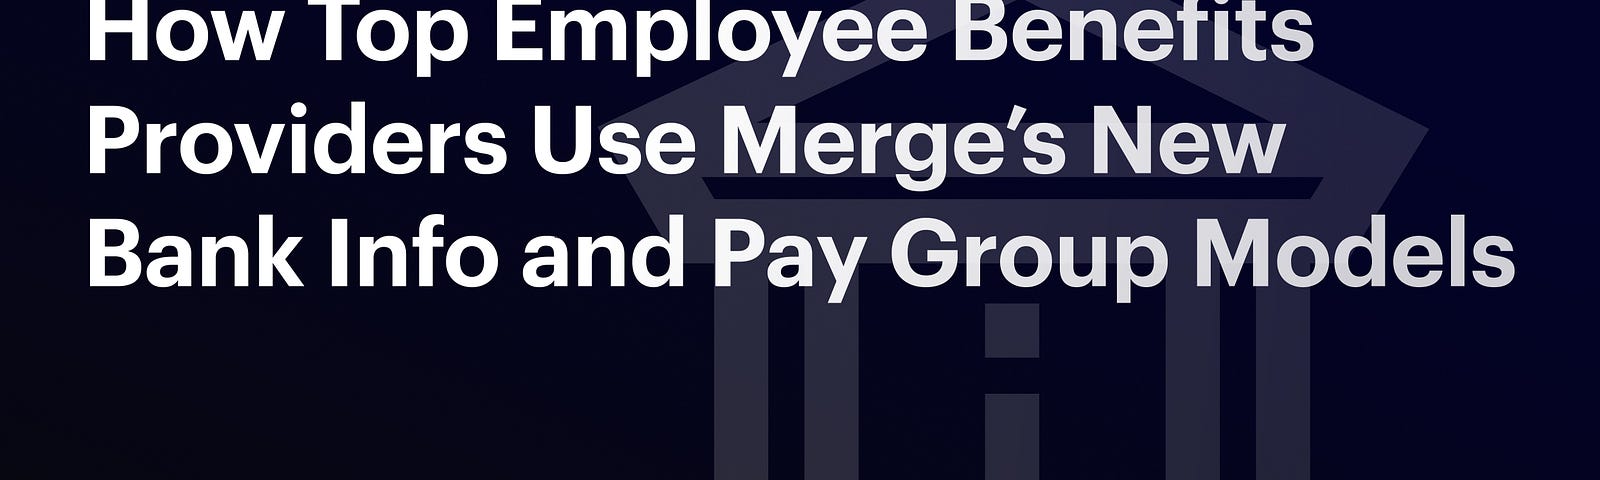 A dark background that reads “How Top Employee Benefit Providers Use Merge’s New Bank Info and Pay Group Models”